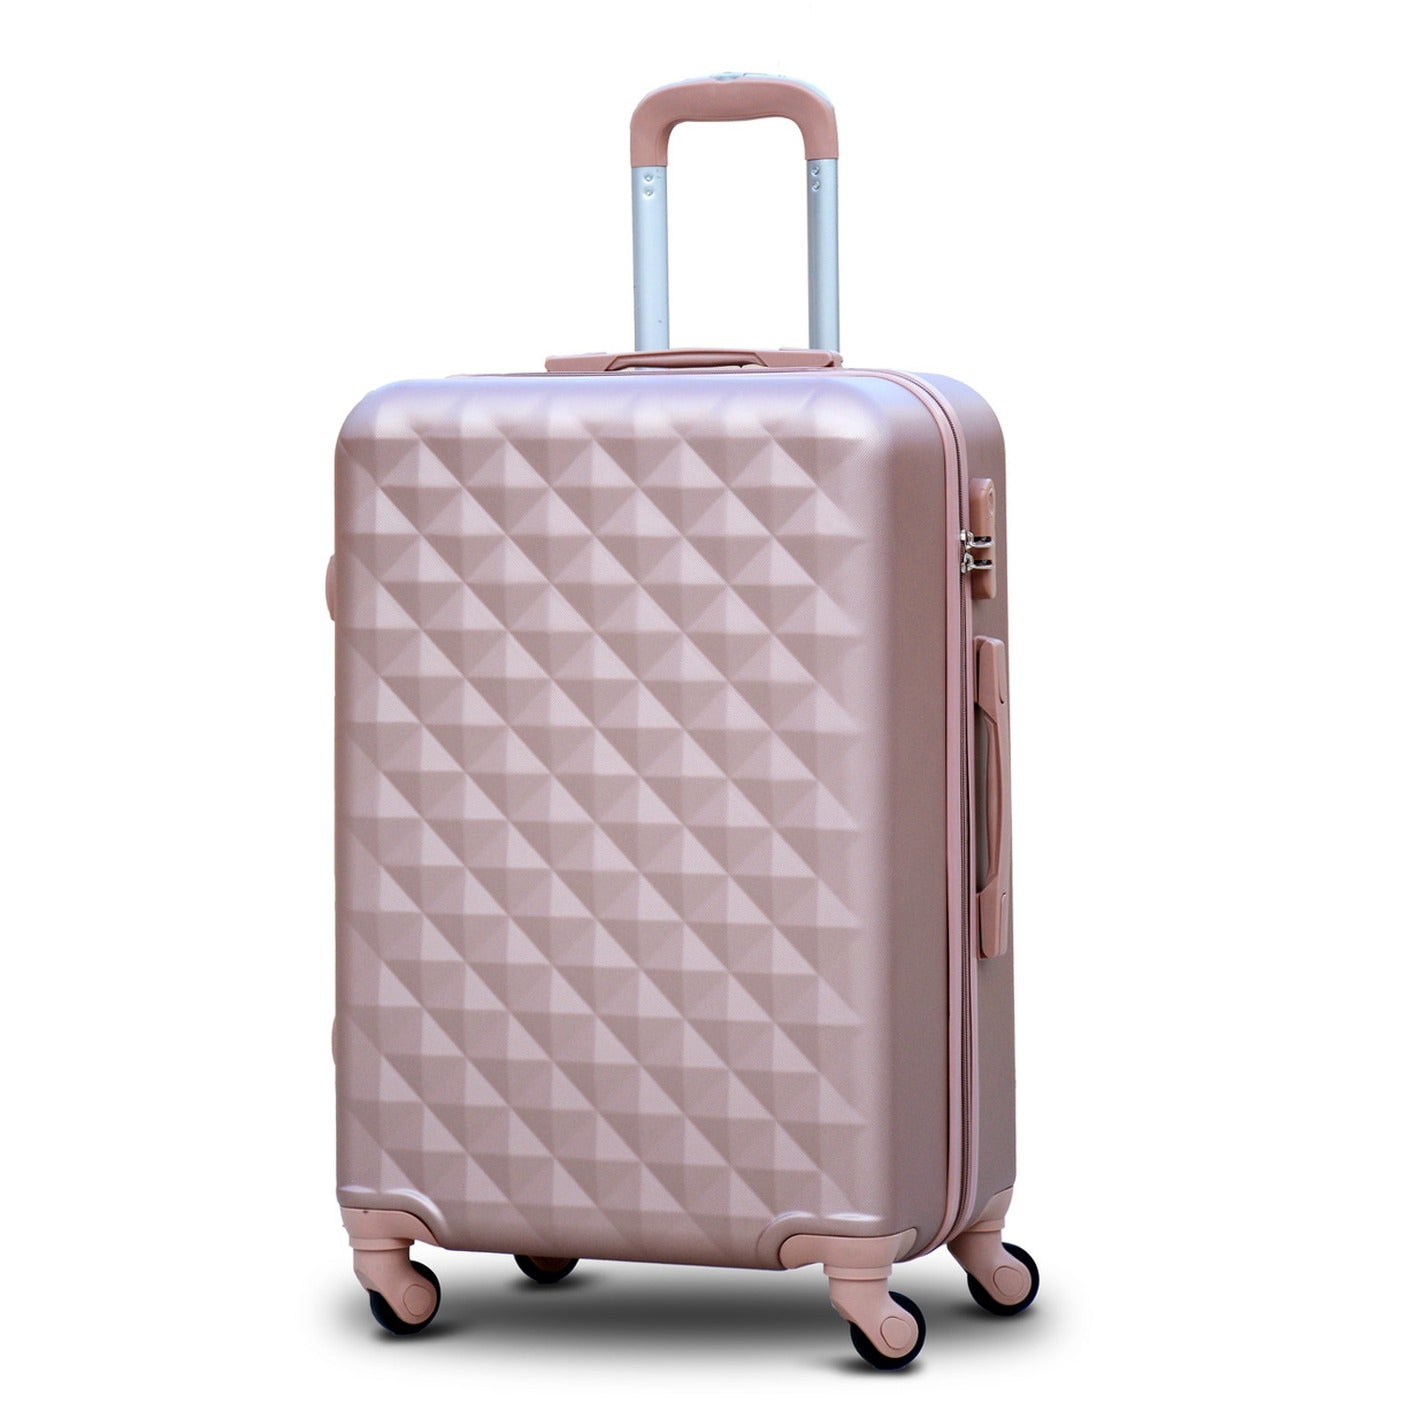 28" Rose Gold Colour Diamond Cut ABS Lightweight Luggage Hard Case Spinner Wheel Trolley Bag